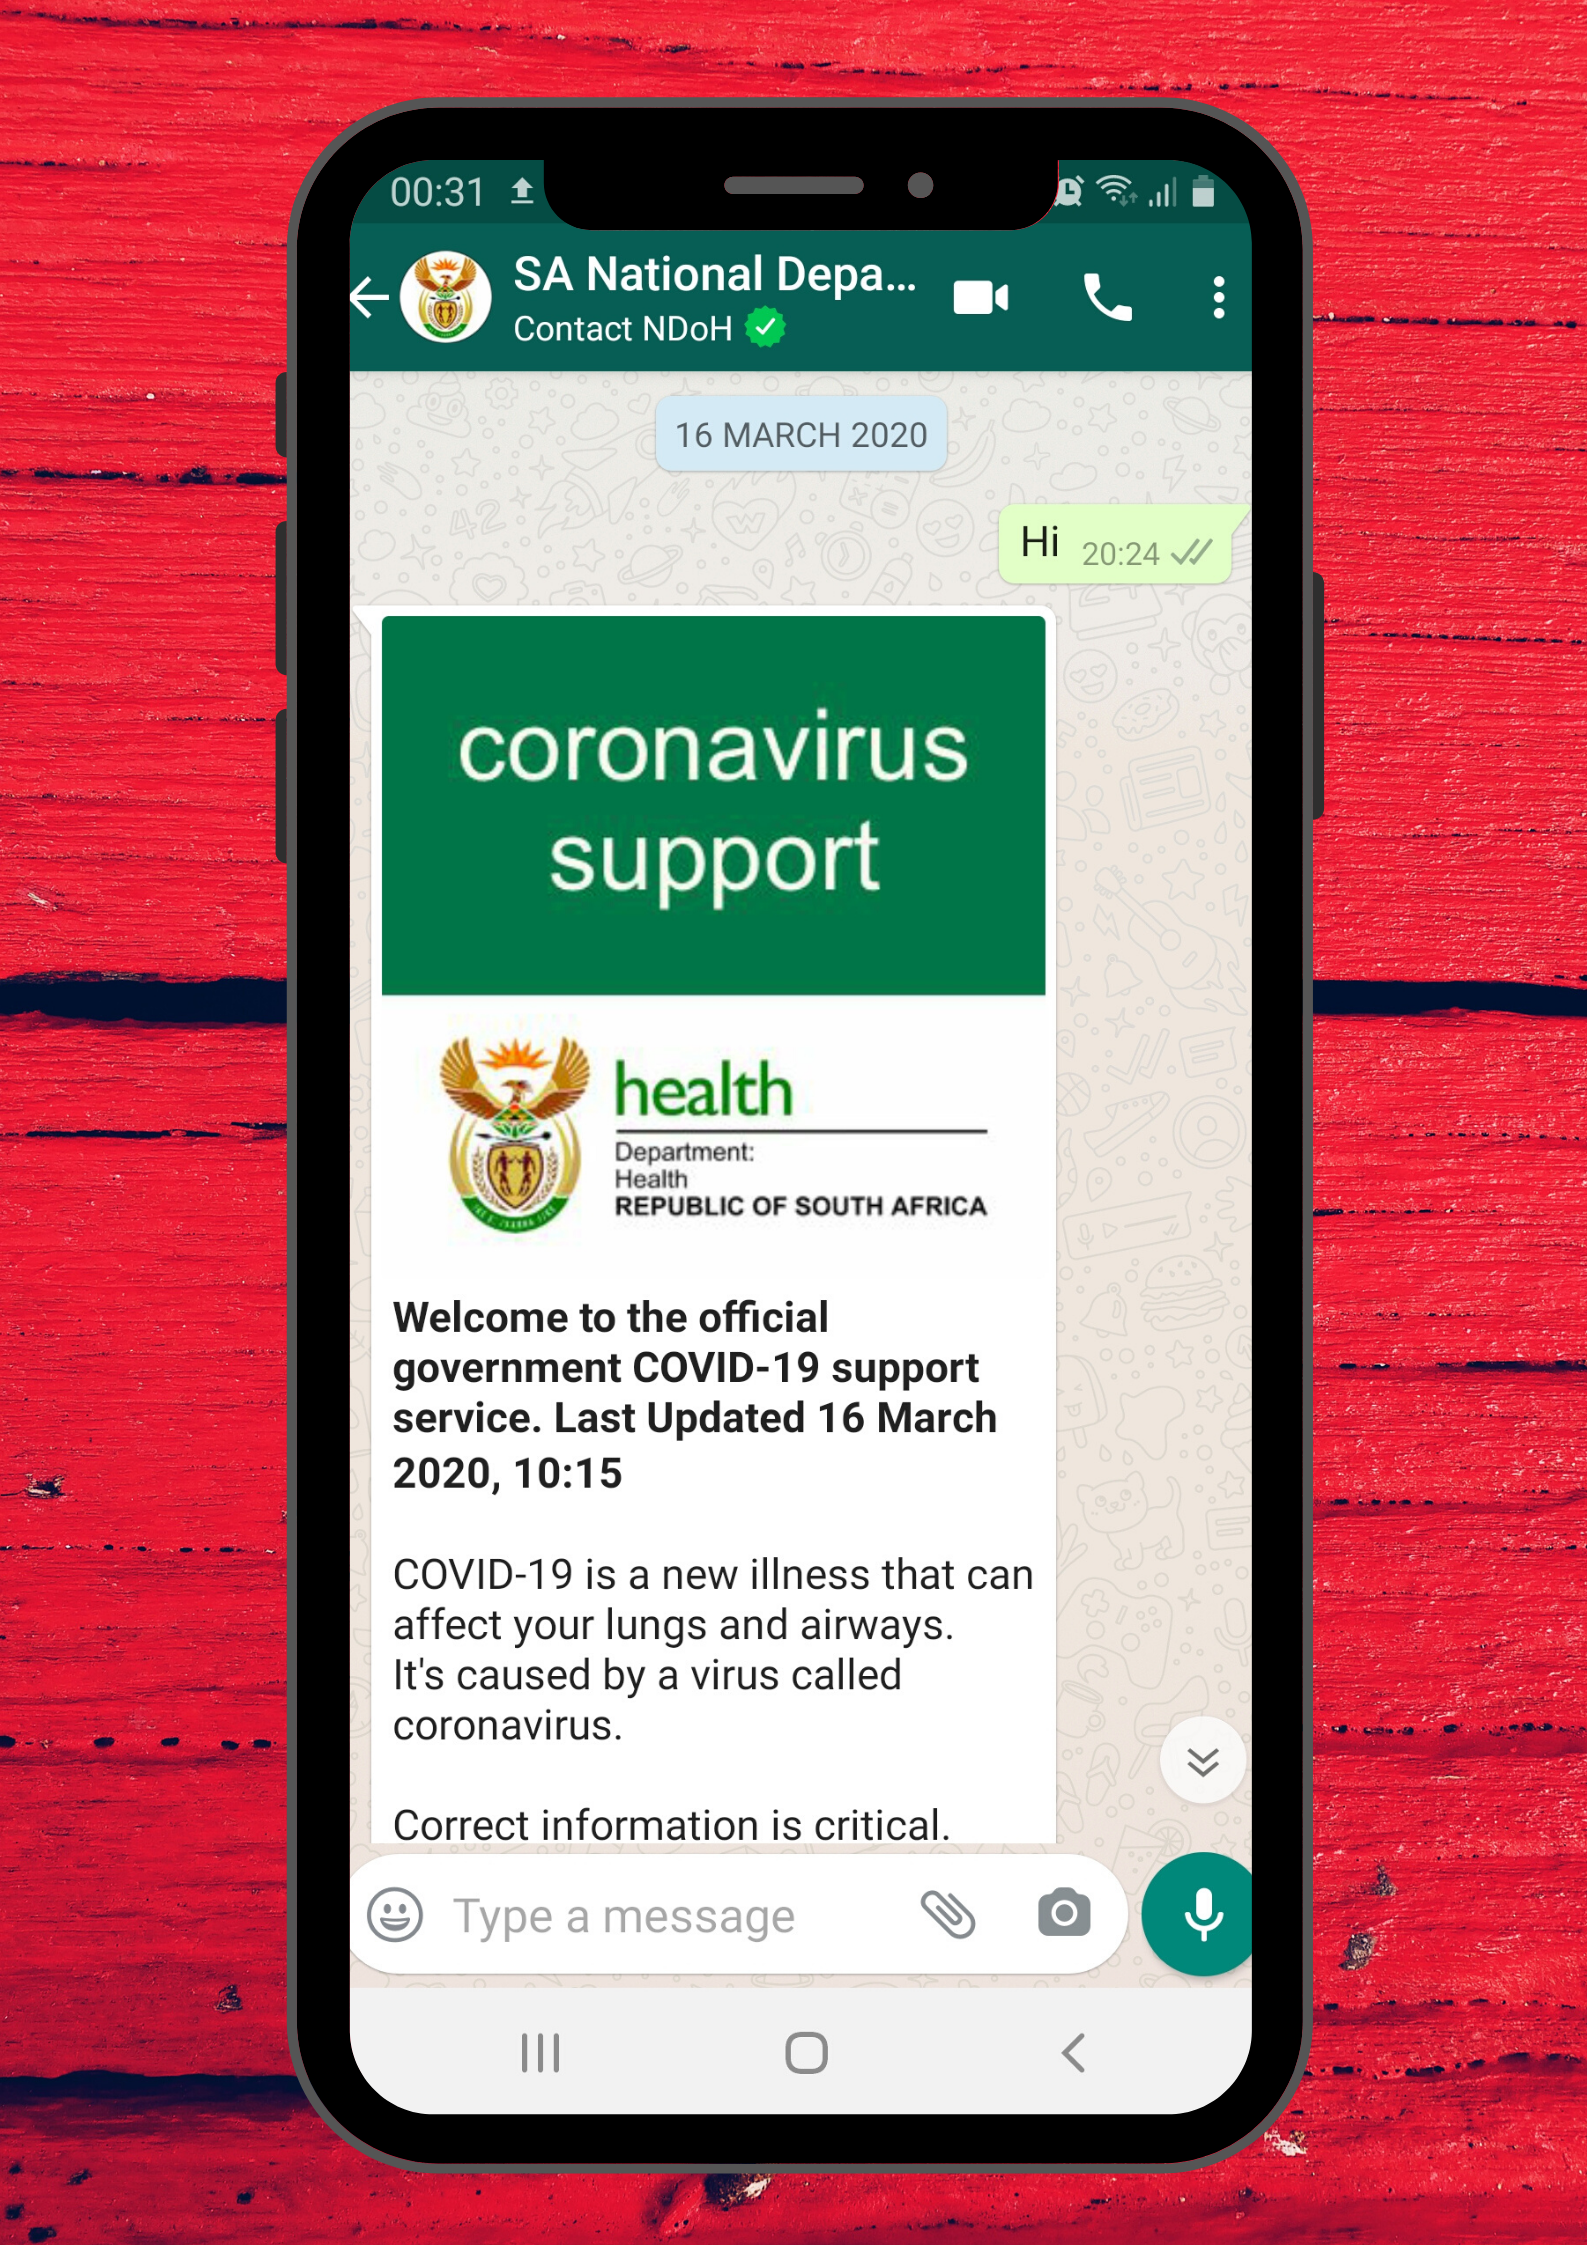 Stay informed on #COVID-19 by joining the South African Support WhatsApp Group. Send "Hi" to 0600123456